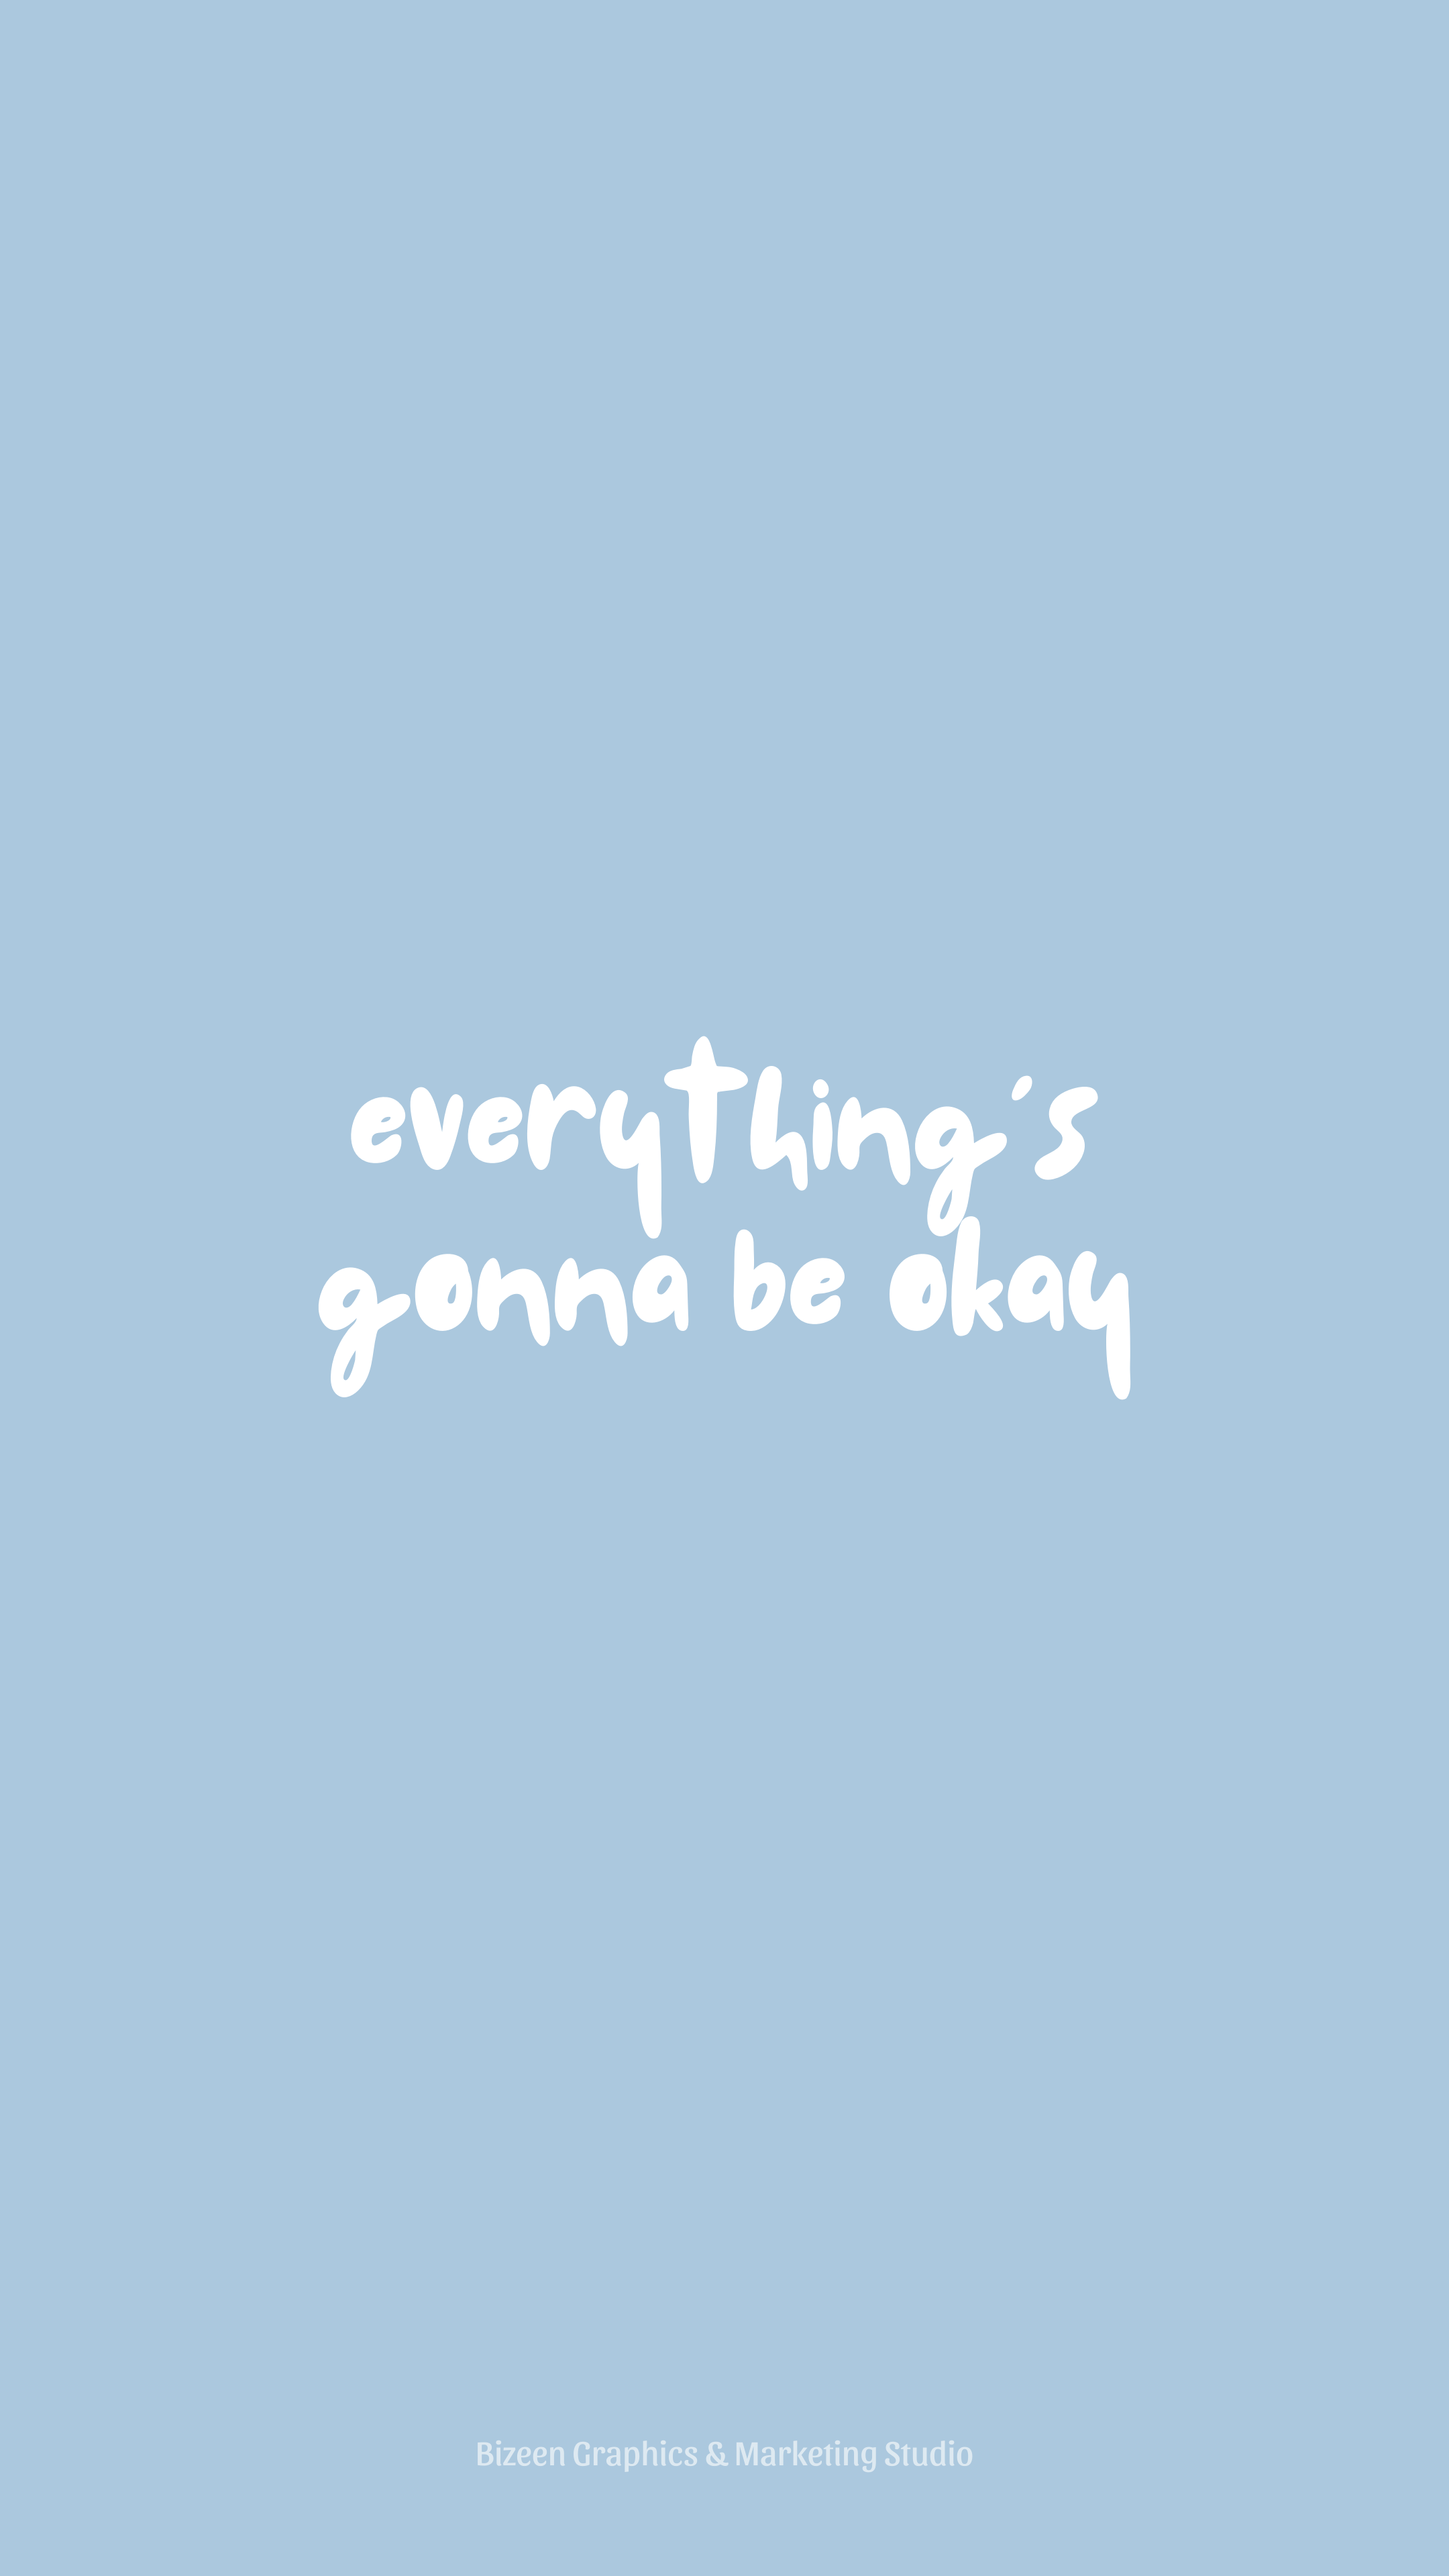 Pastel Blue Aesthetic Wallpaper Quotes. Everything's going to be okay. Blue quotes, Baby blue quotes, Inspirational quotes background